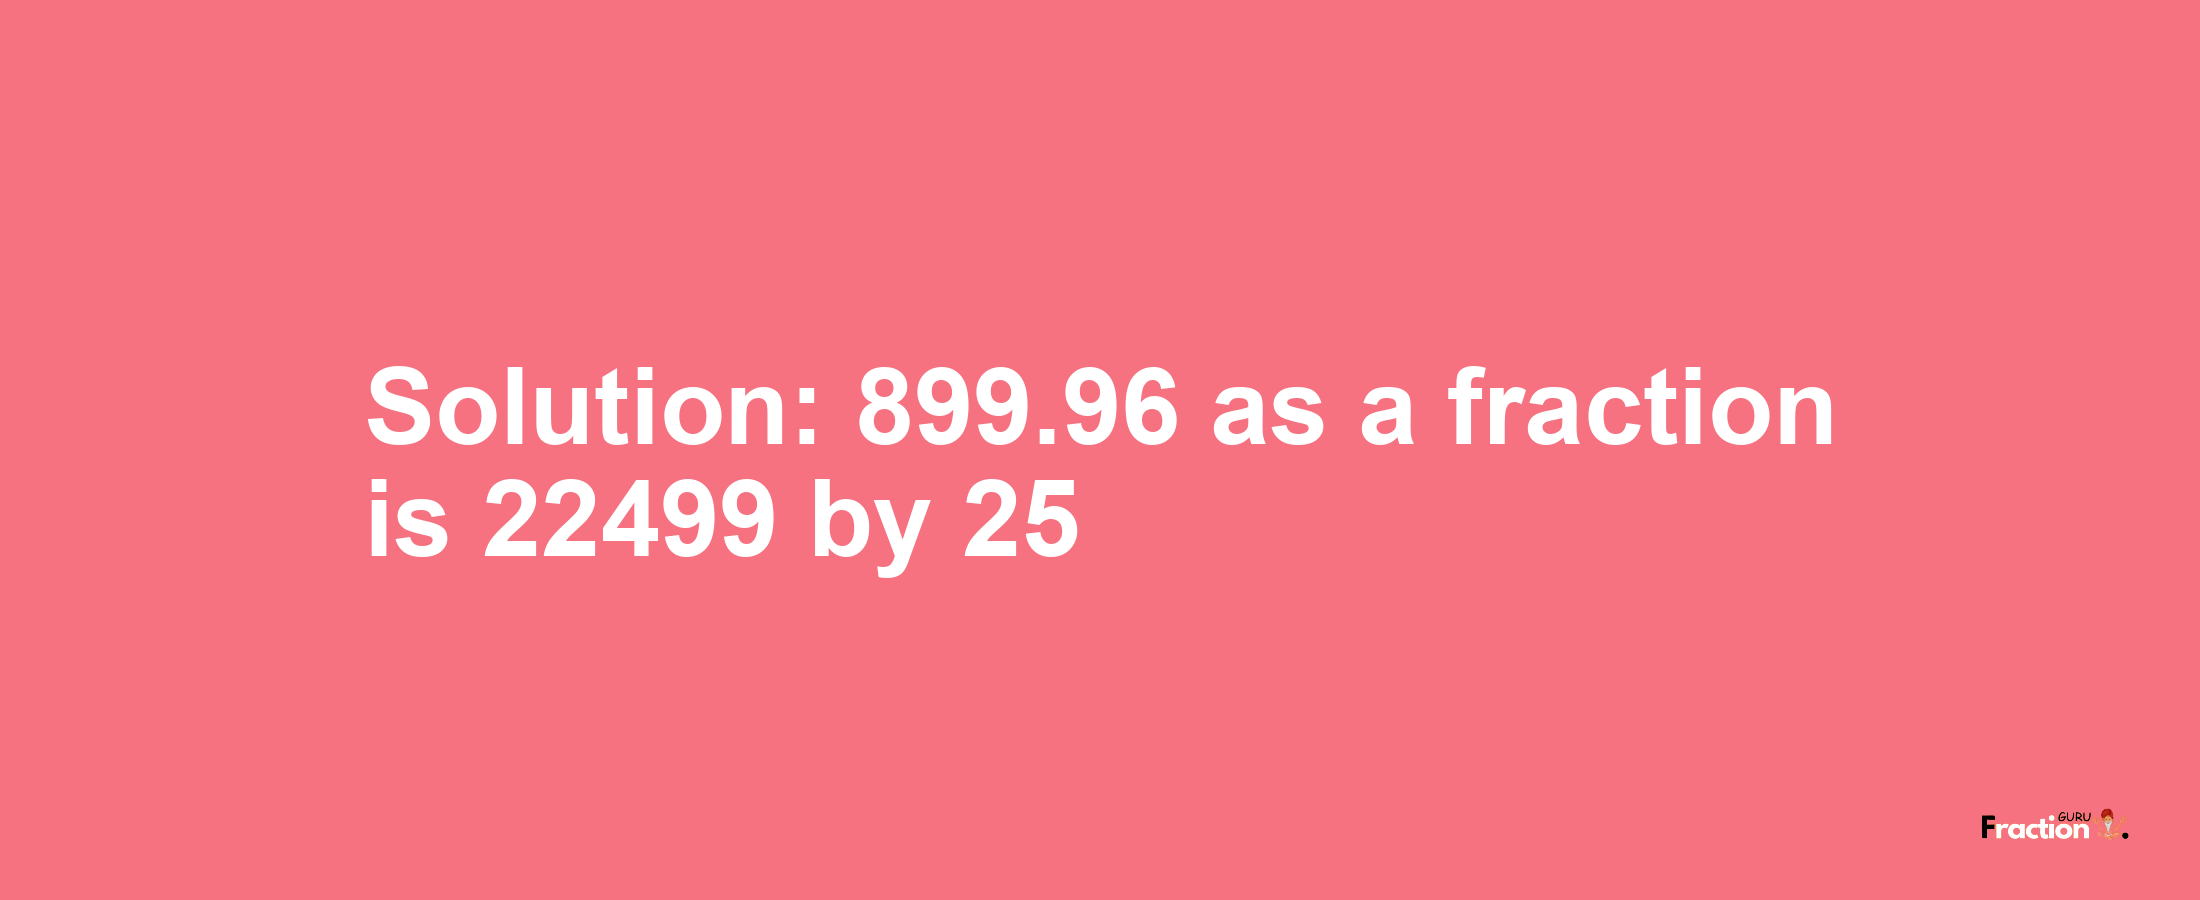 Solution:899.96 as a fraction is 22499/25